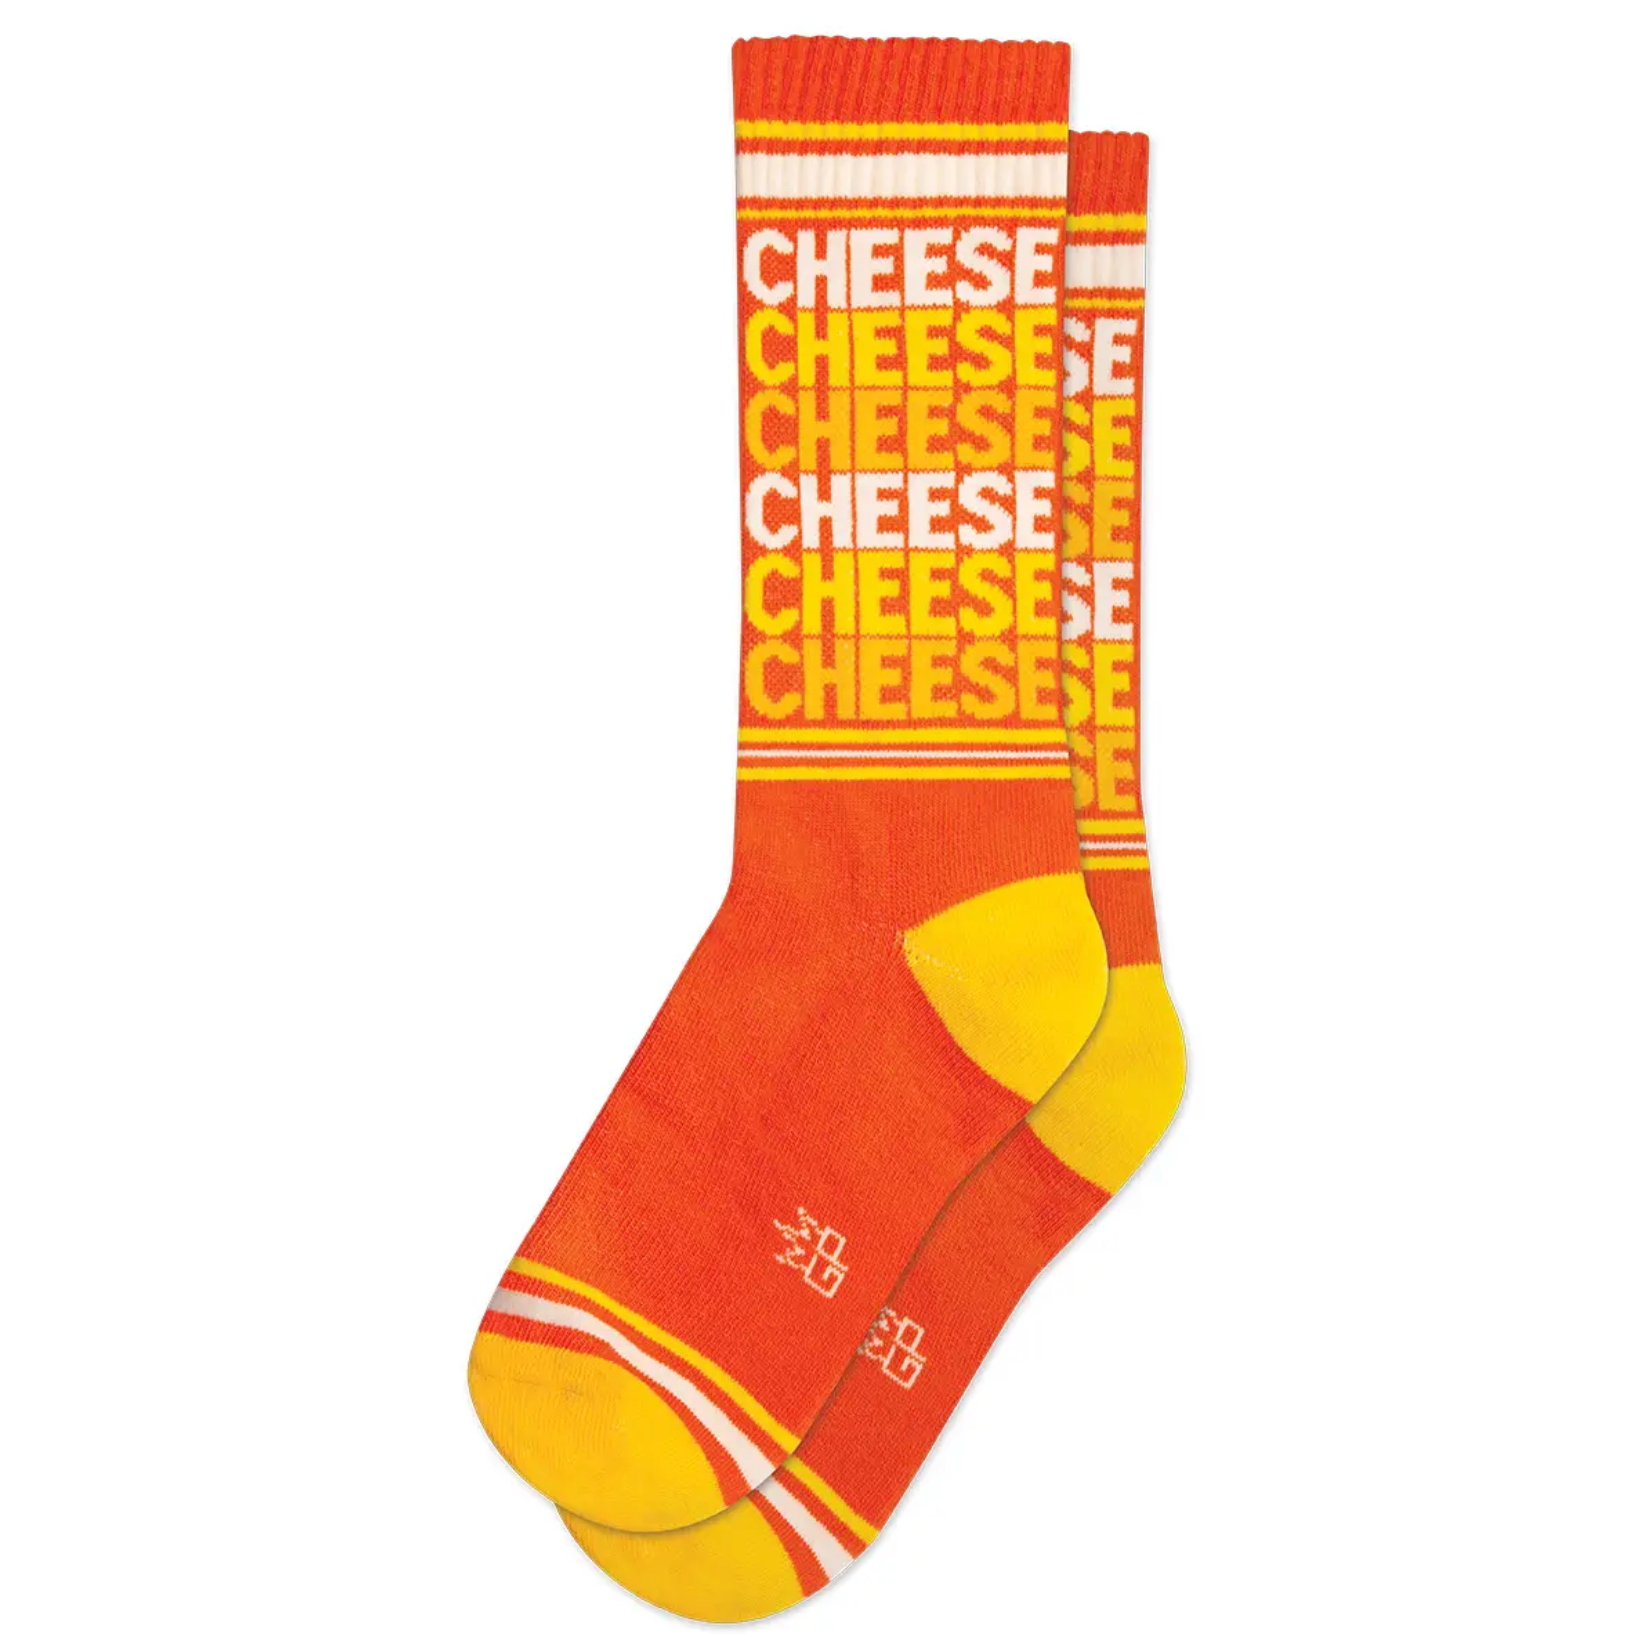 Orange unisex gym socks. They have yellow on the toes and heels and say CHEESE CHEESE CHEESE CHEESE CHEESE CHEESE CHEESE in yellow, white and orange letters. 